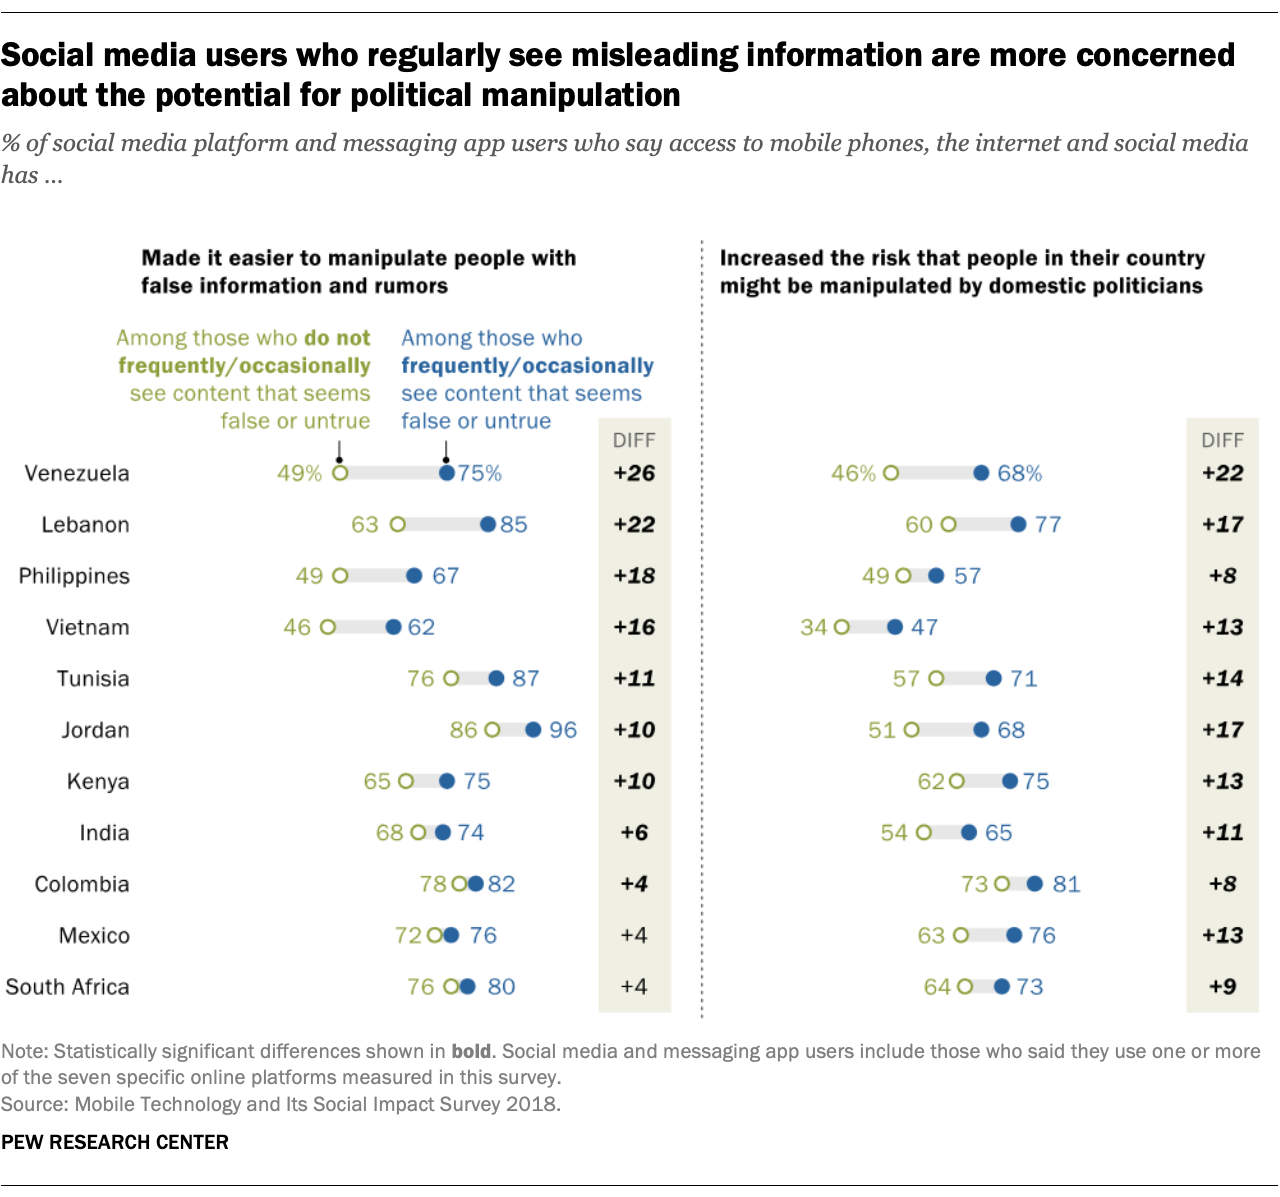 Social media users who regularly see misleading information are more concerned about the potential for political manipulation